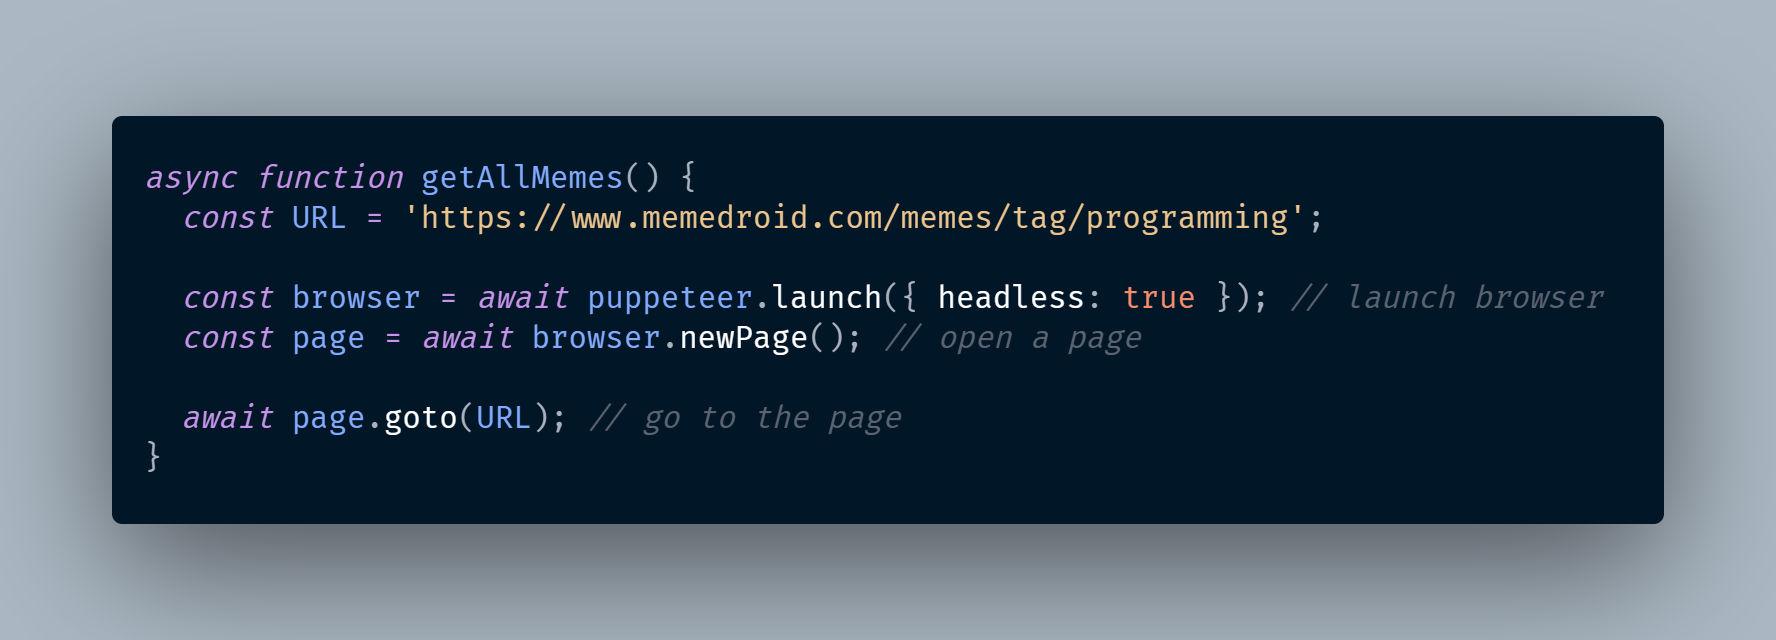 We simply launch the browser and open the page for memedroid in this code 👆.